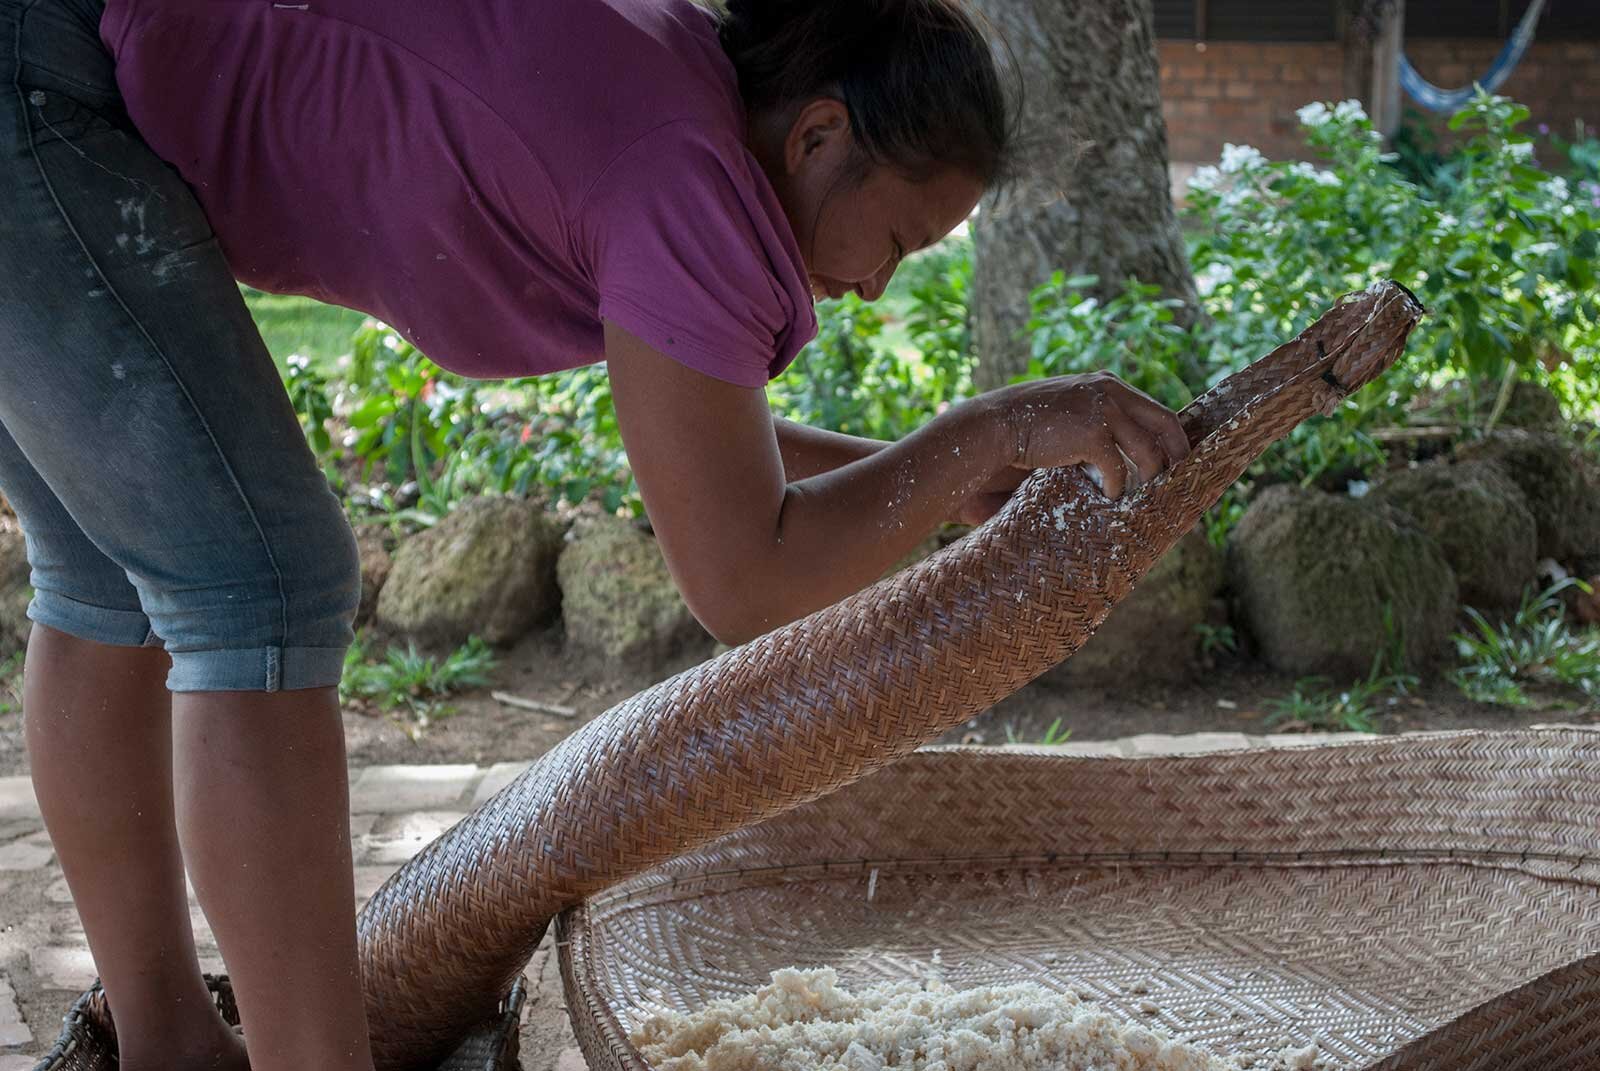  The grated manioc is then stuffed into a plaited palm tube called a  matapi  in Guyana or a  tipiti  in Brazil. The Macuxi word is  tingi  I am told, which meaning anaconda. It’s a perfect visual metaphor when I see the way the tube is stuffed till 